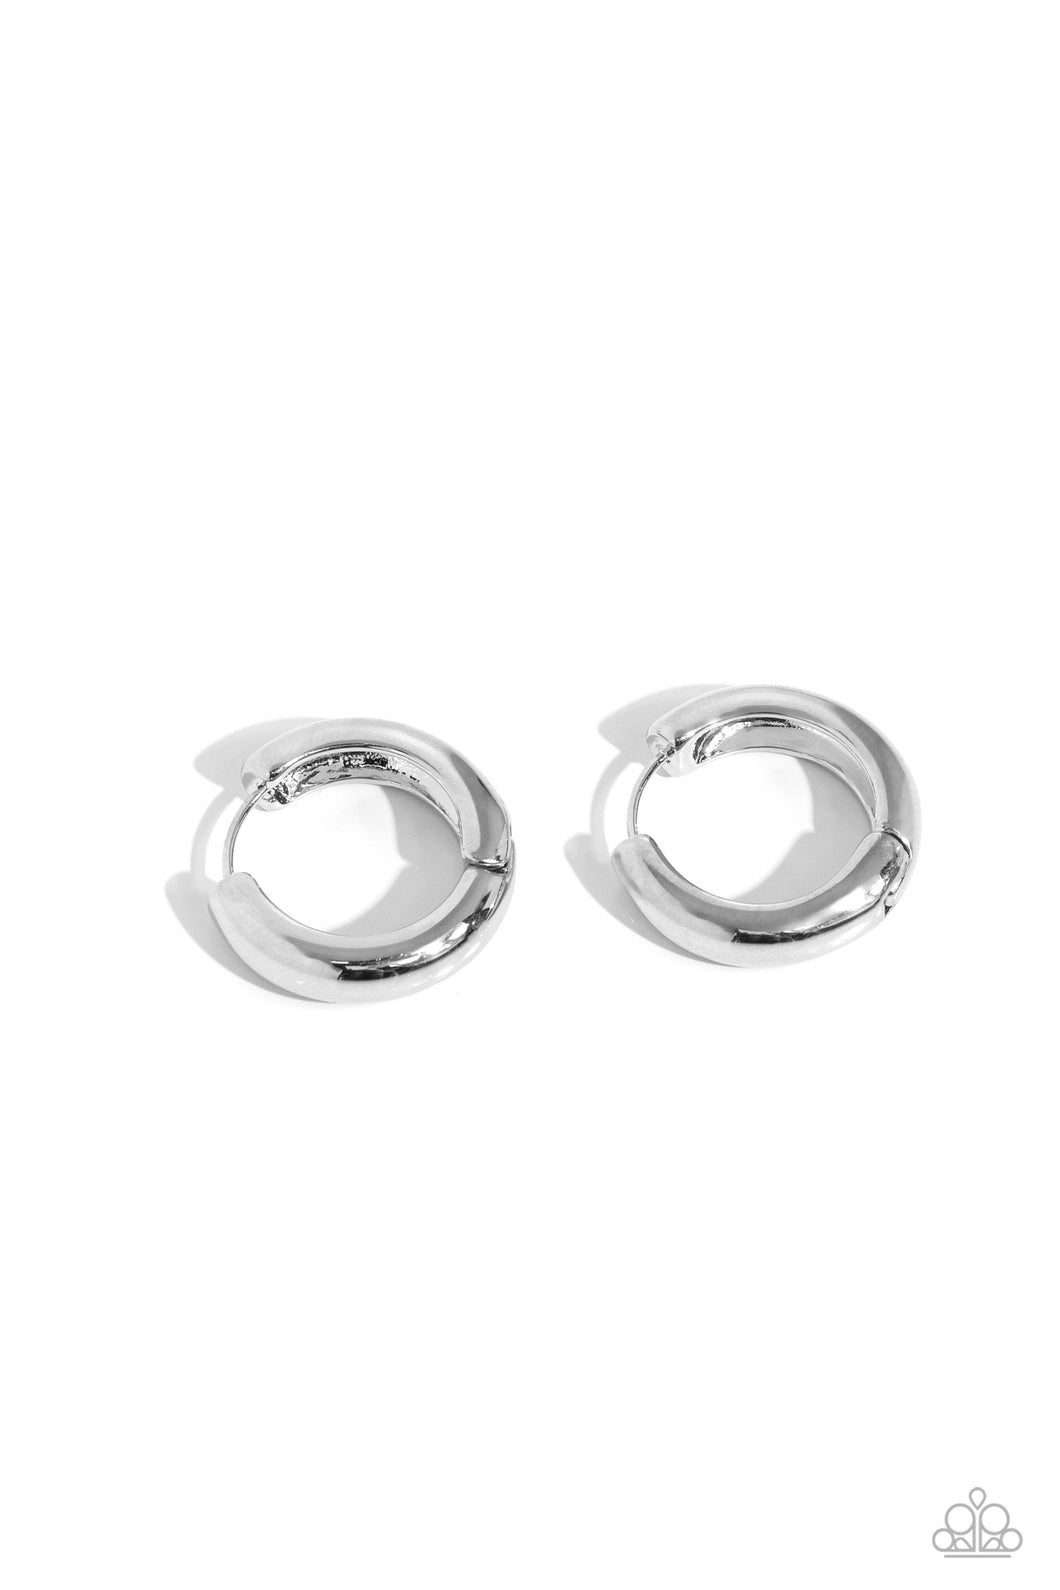 Simply Sinuous - Silver Earring